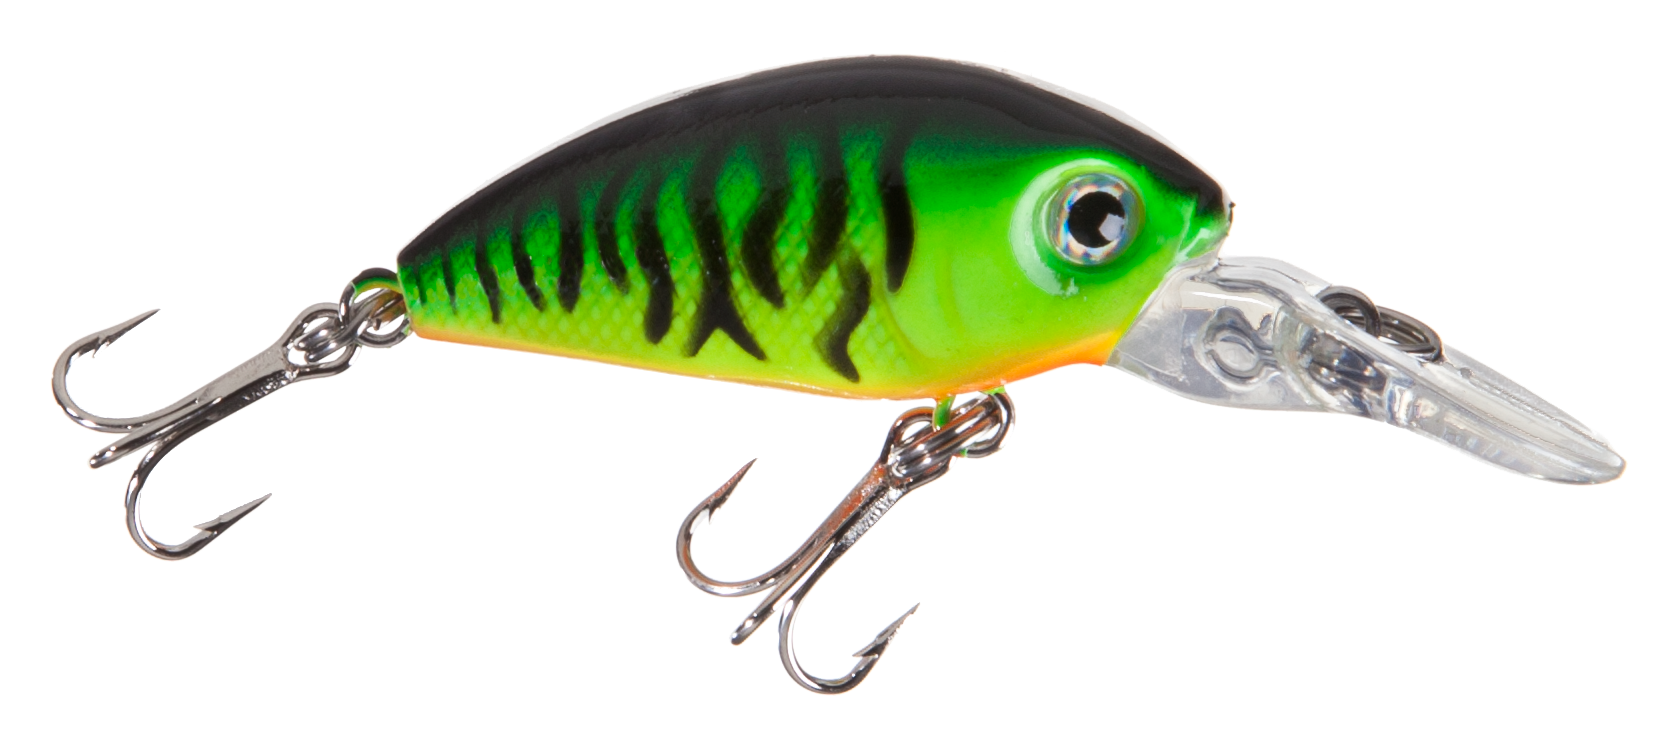 Micro Glide Baits and Micro Lipless Crankbaits for